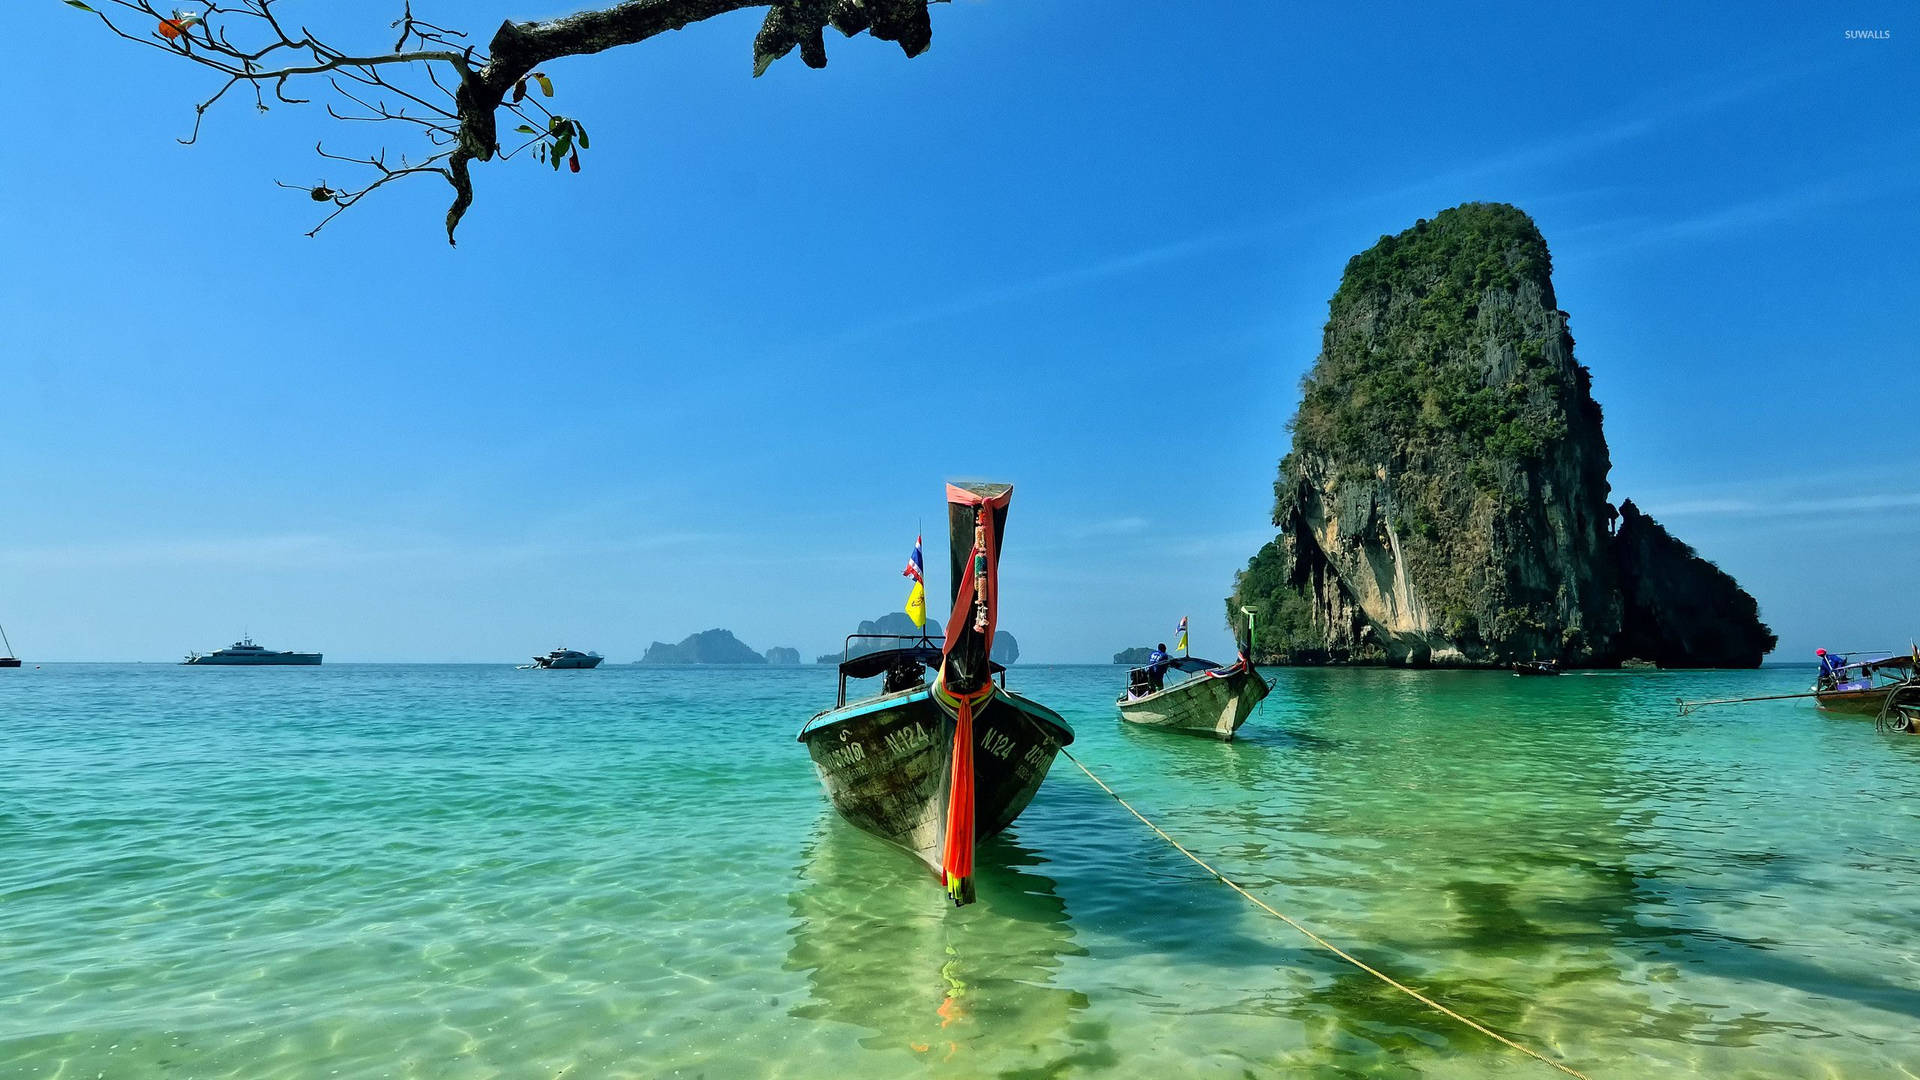 Tropical Paradise: Railay Beach In The Philippines